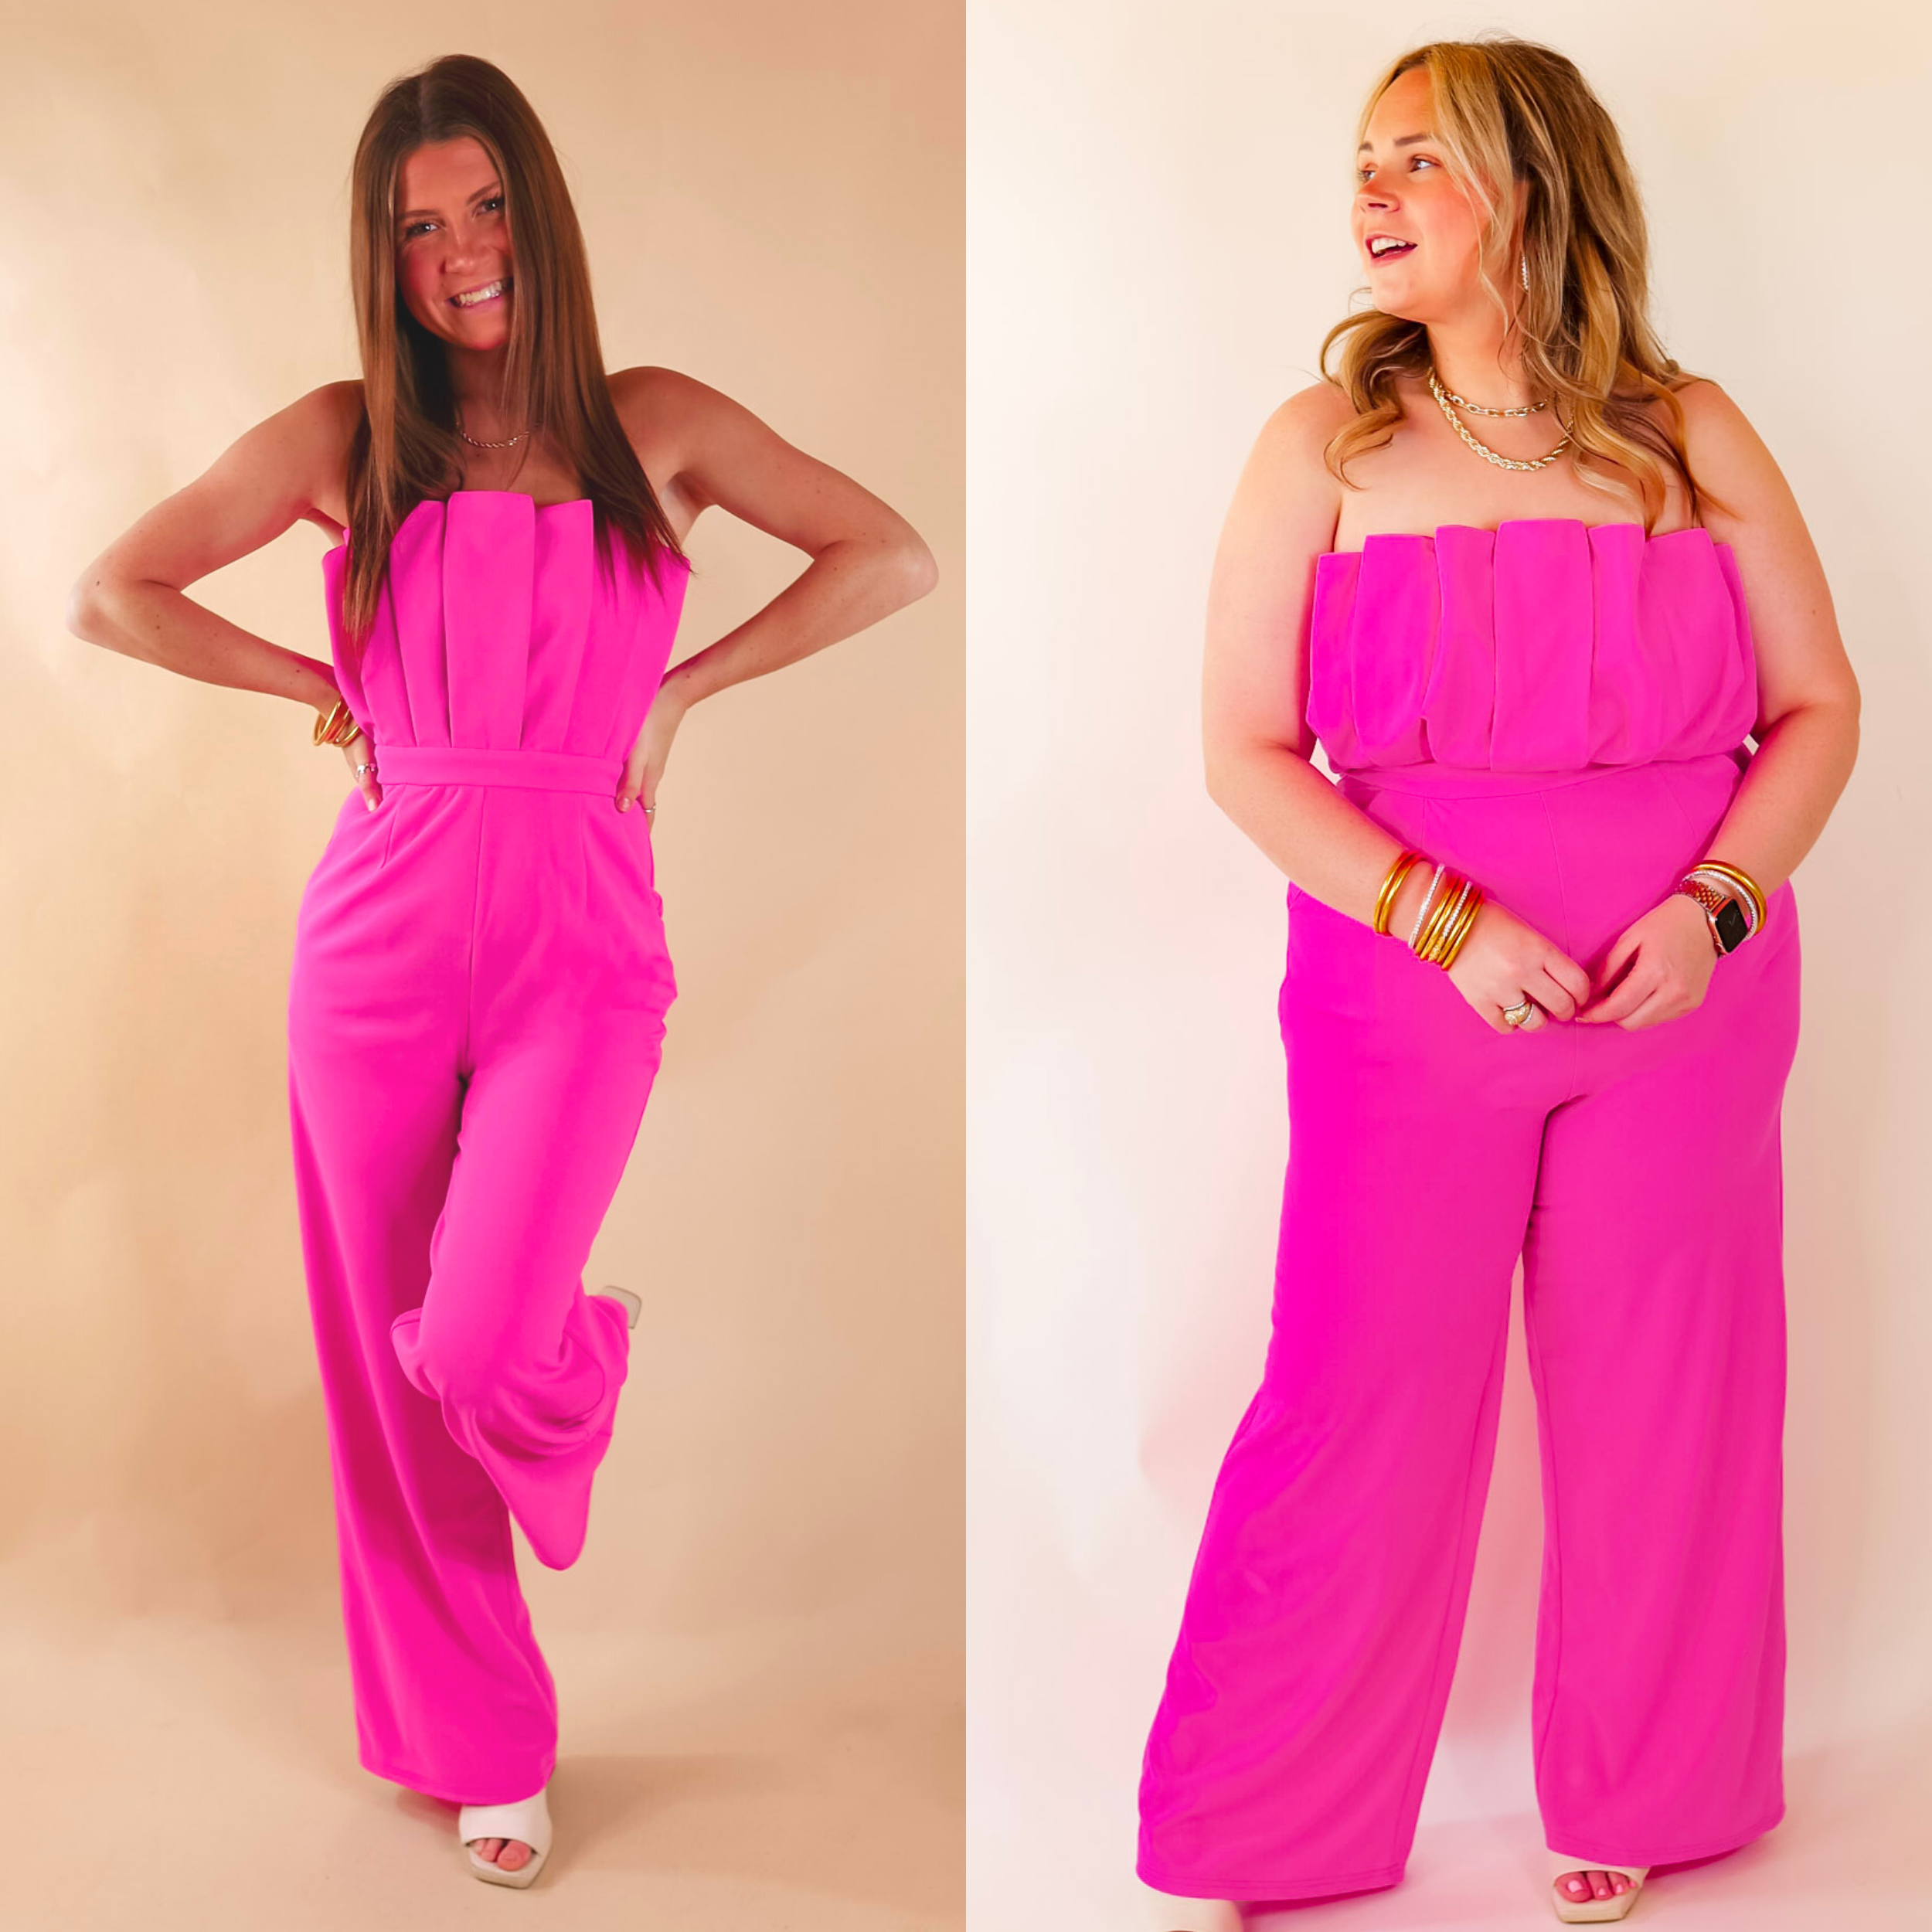 Models are wearing a pink sleeveless jumpsuit featuring a plated bodice.